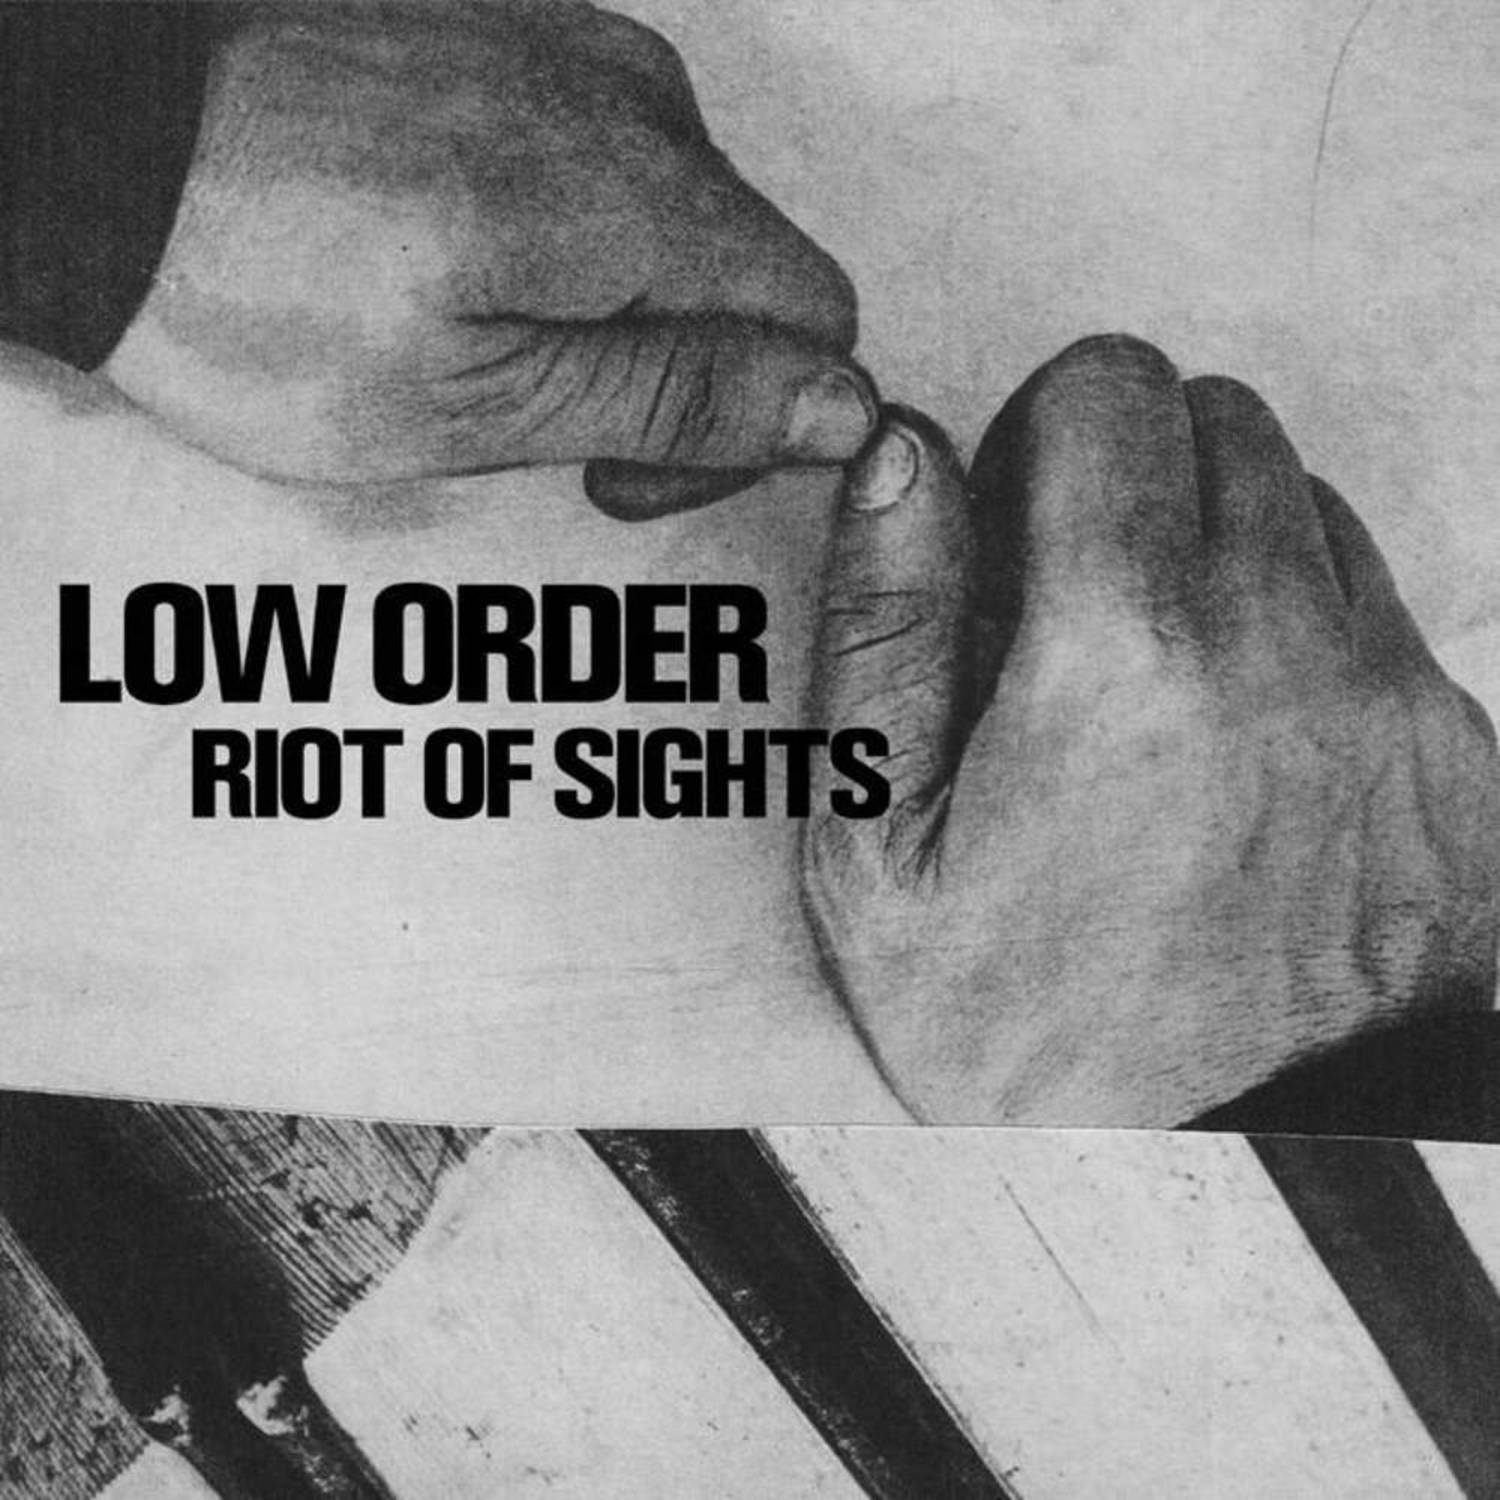 Low Order - RIOTS OF SIGHTS